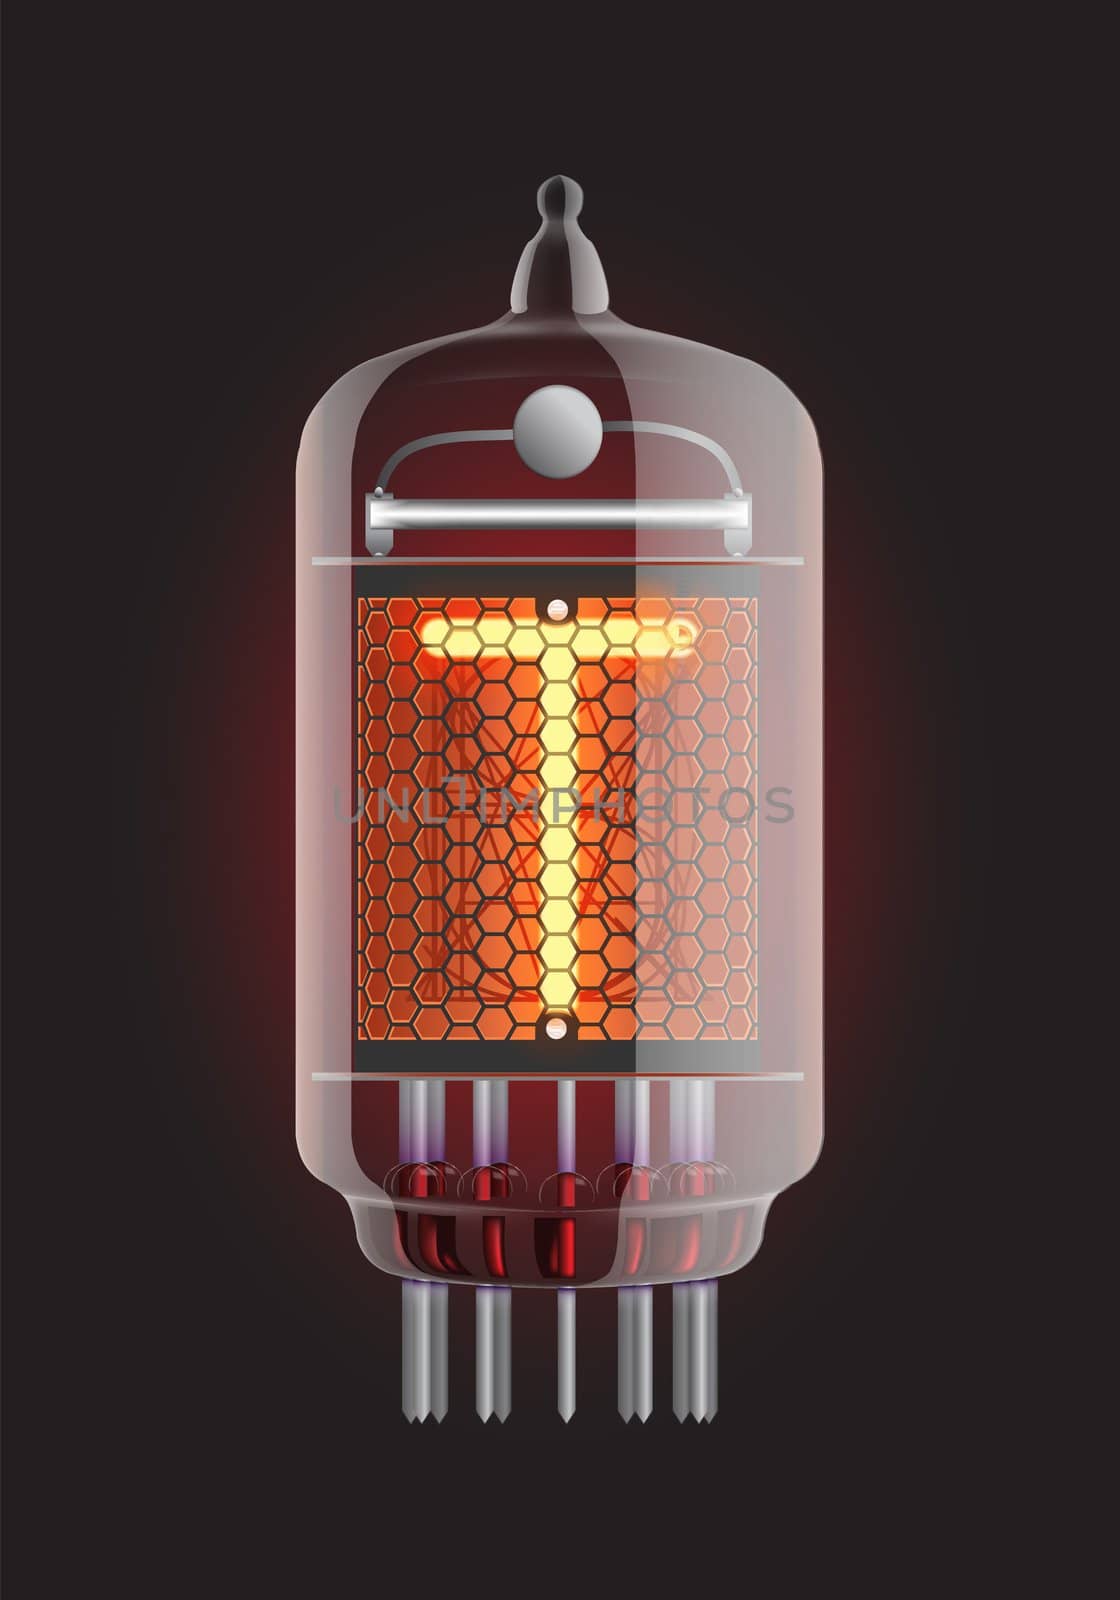 Nixie tube indicator. Letter "T" from retro, Transparency guaranteed. Vector illustration.